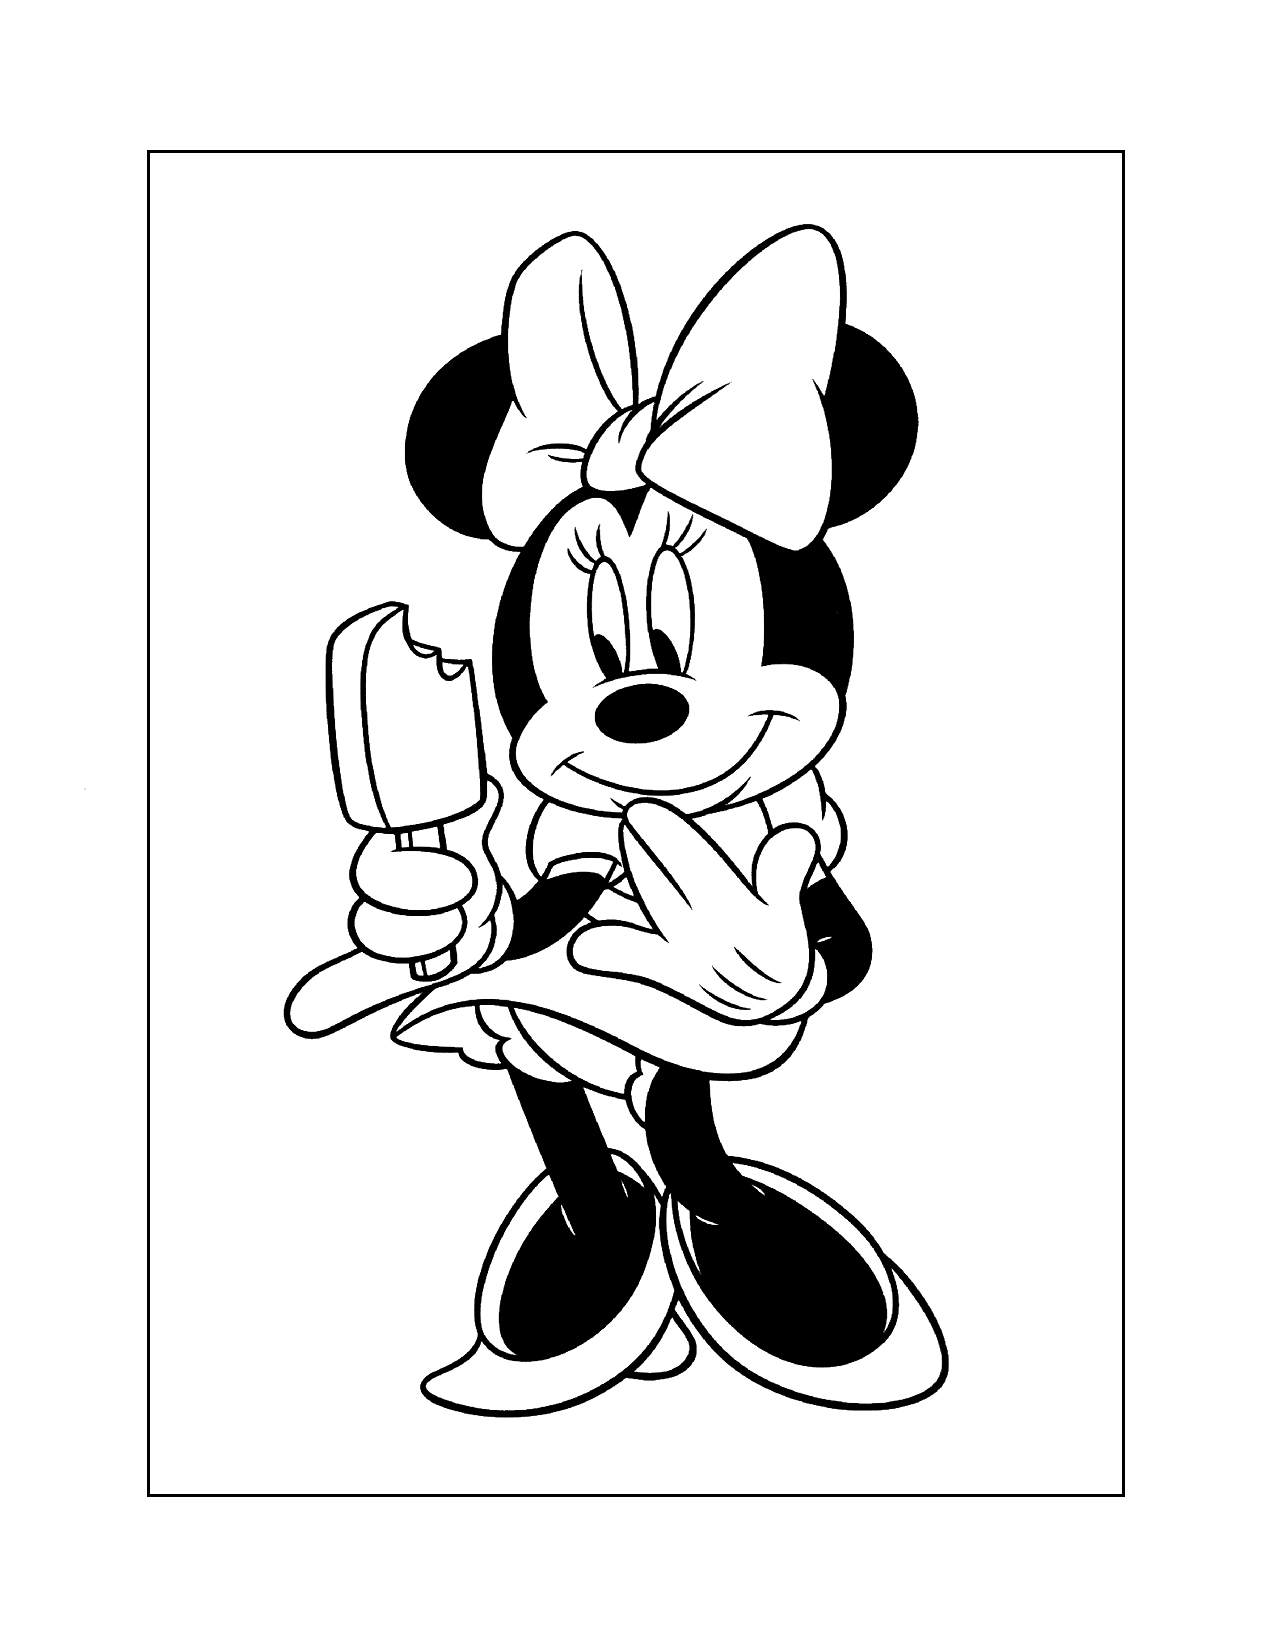 Minnie Mouse Eating Ice Cream Bar Coloring Page